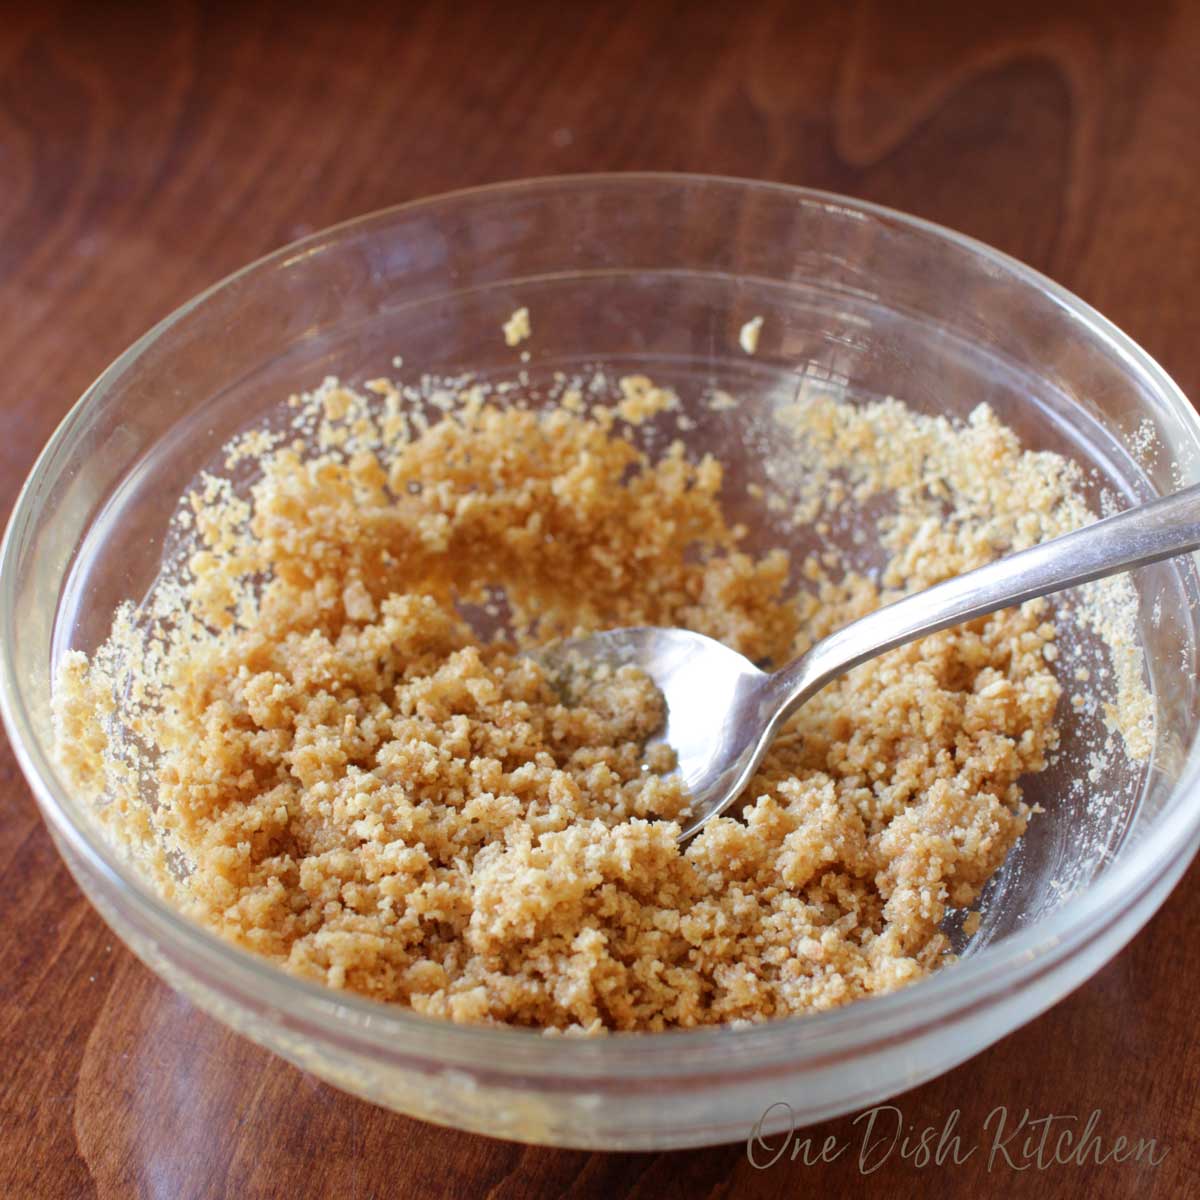 Graham cracker crumbs in a bowl with a spoon.